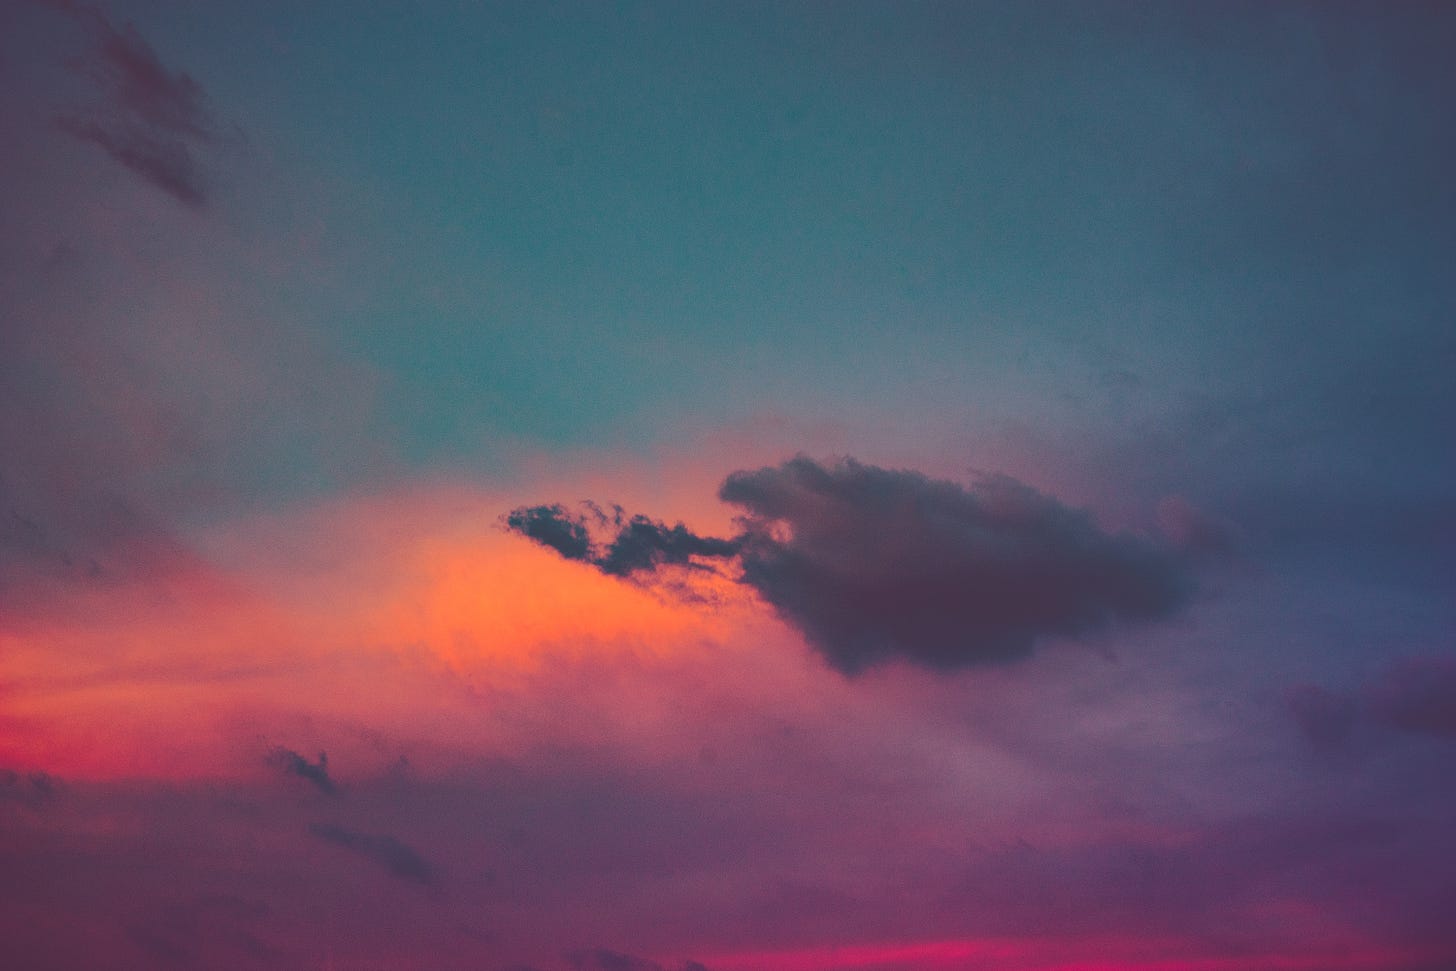 A vibrant sky with patches of orange, pink, blue, and violet. A small cloud with a smaller cloud-friend hangs in the middle of the image.